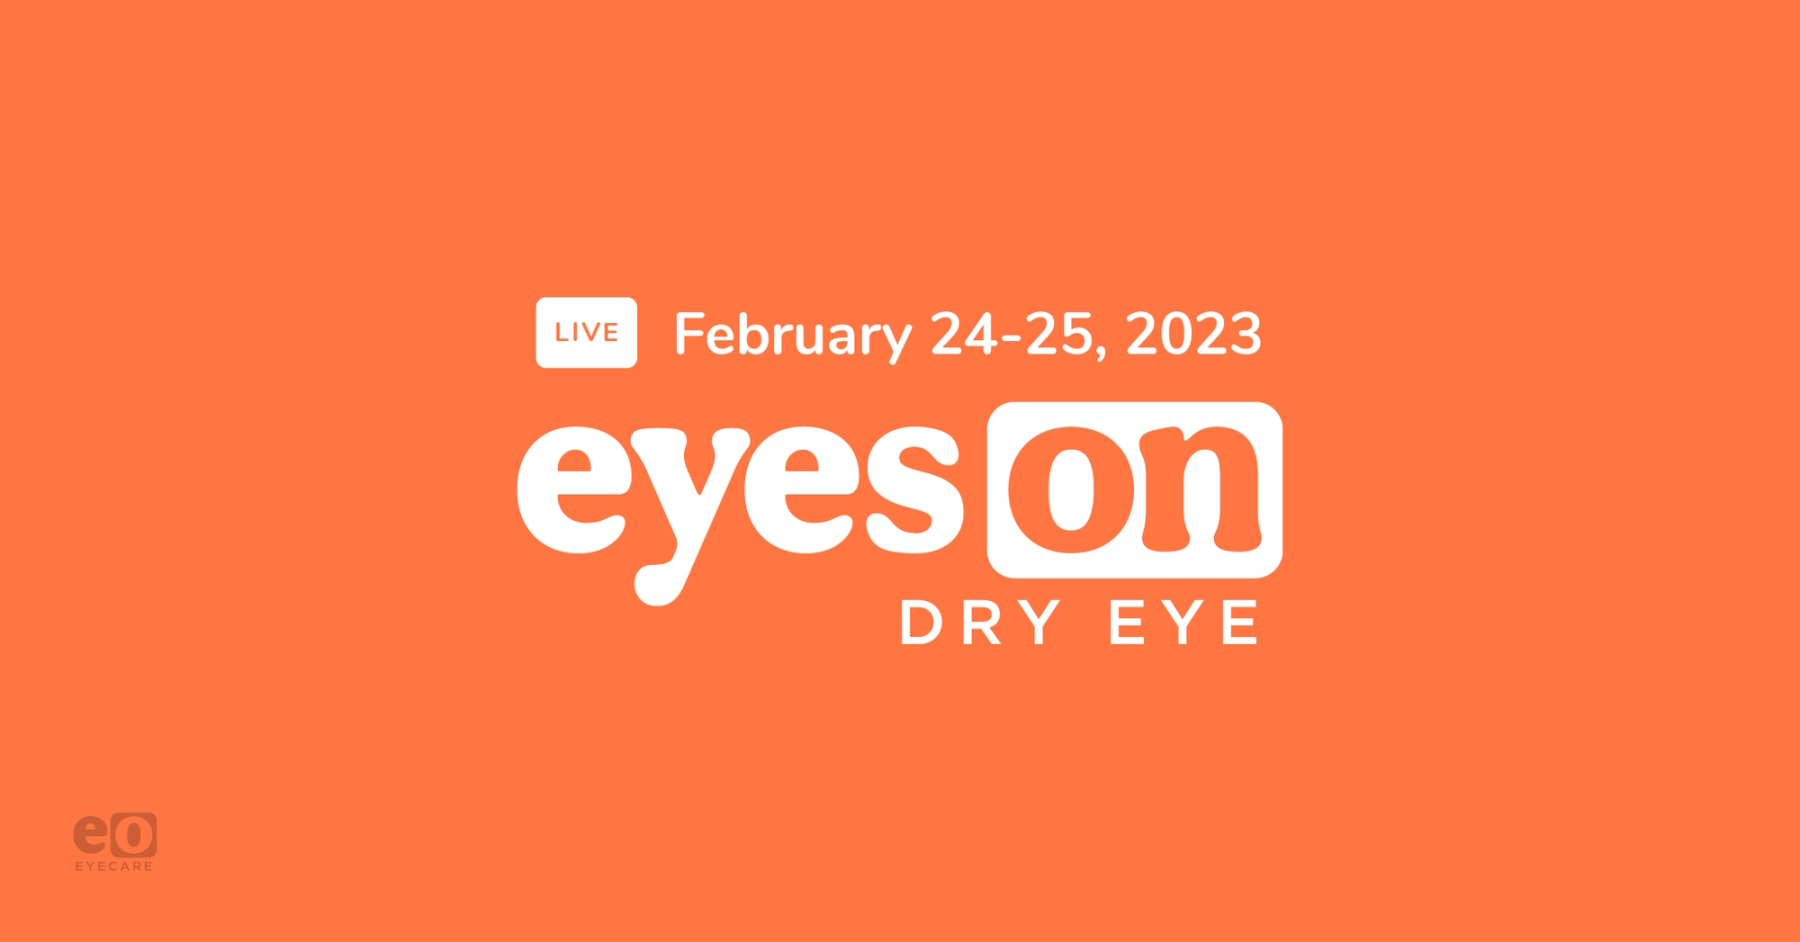 Registration is now open for Eyes On Dry Eye, February 24th & 25th, 2023